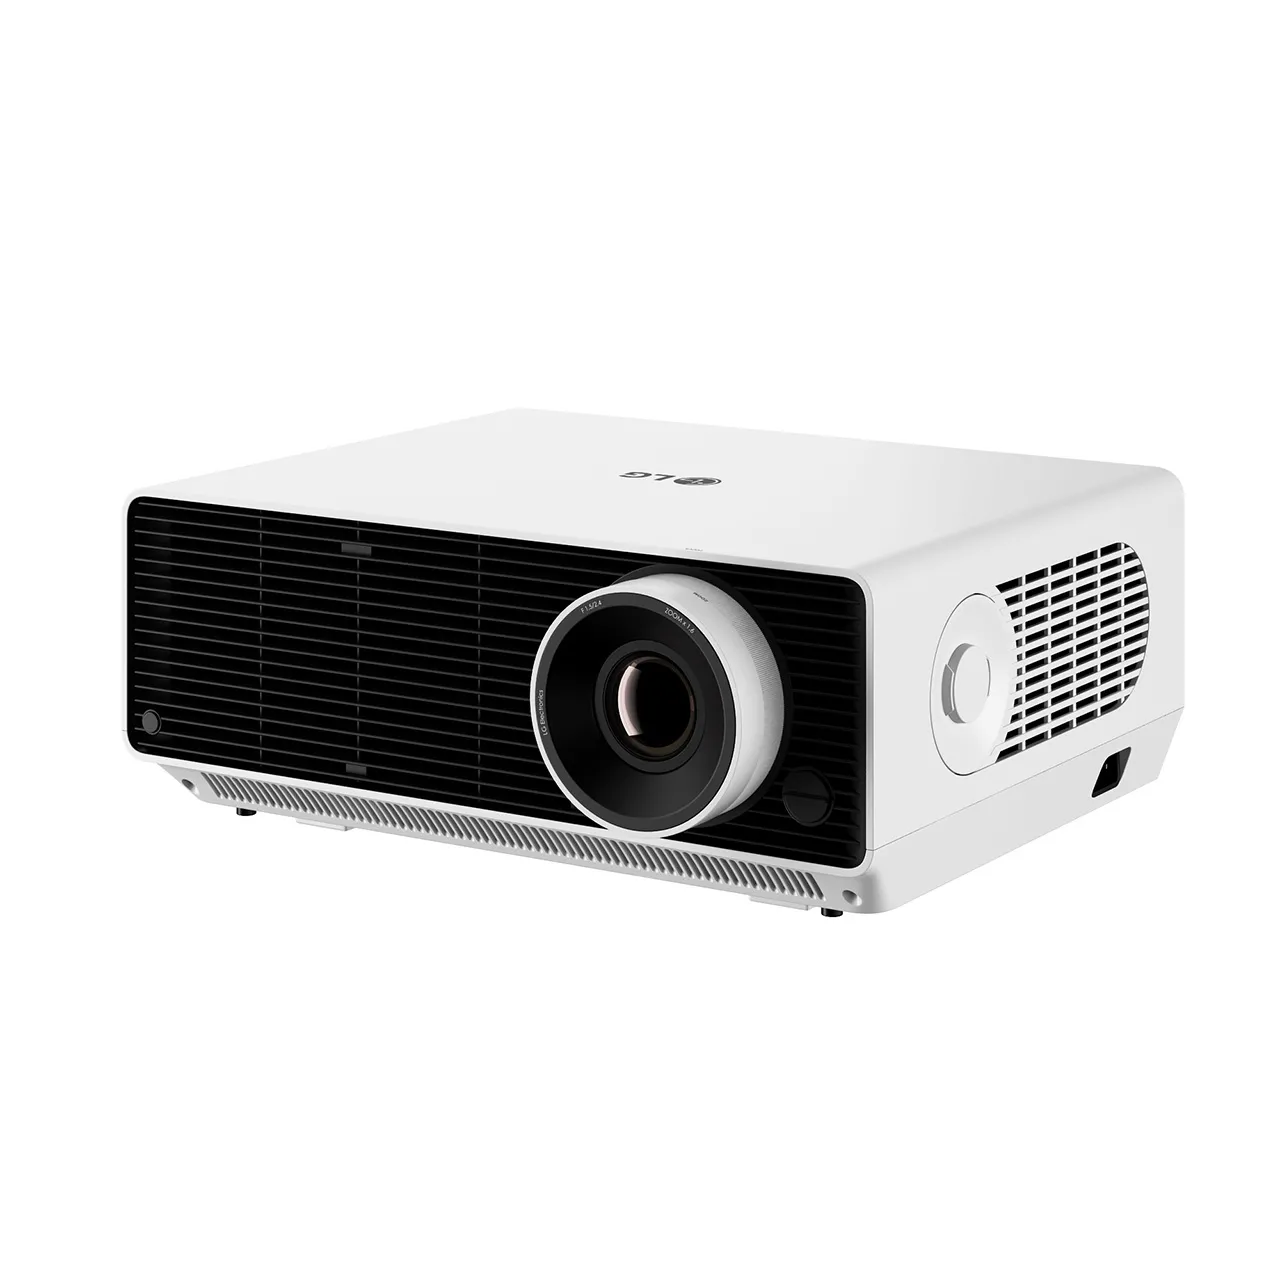 Products – laser-probeam-bf50nst-4k-video-projector-by-lg